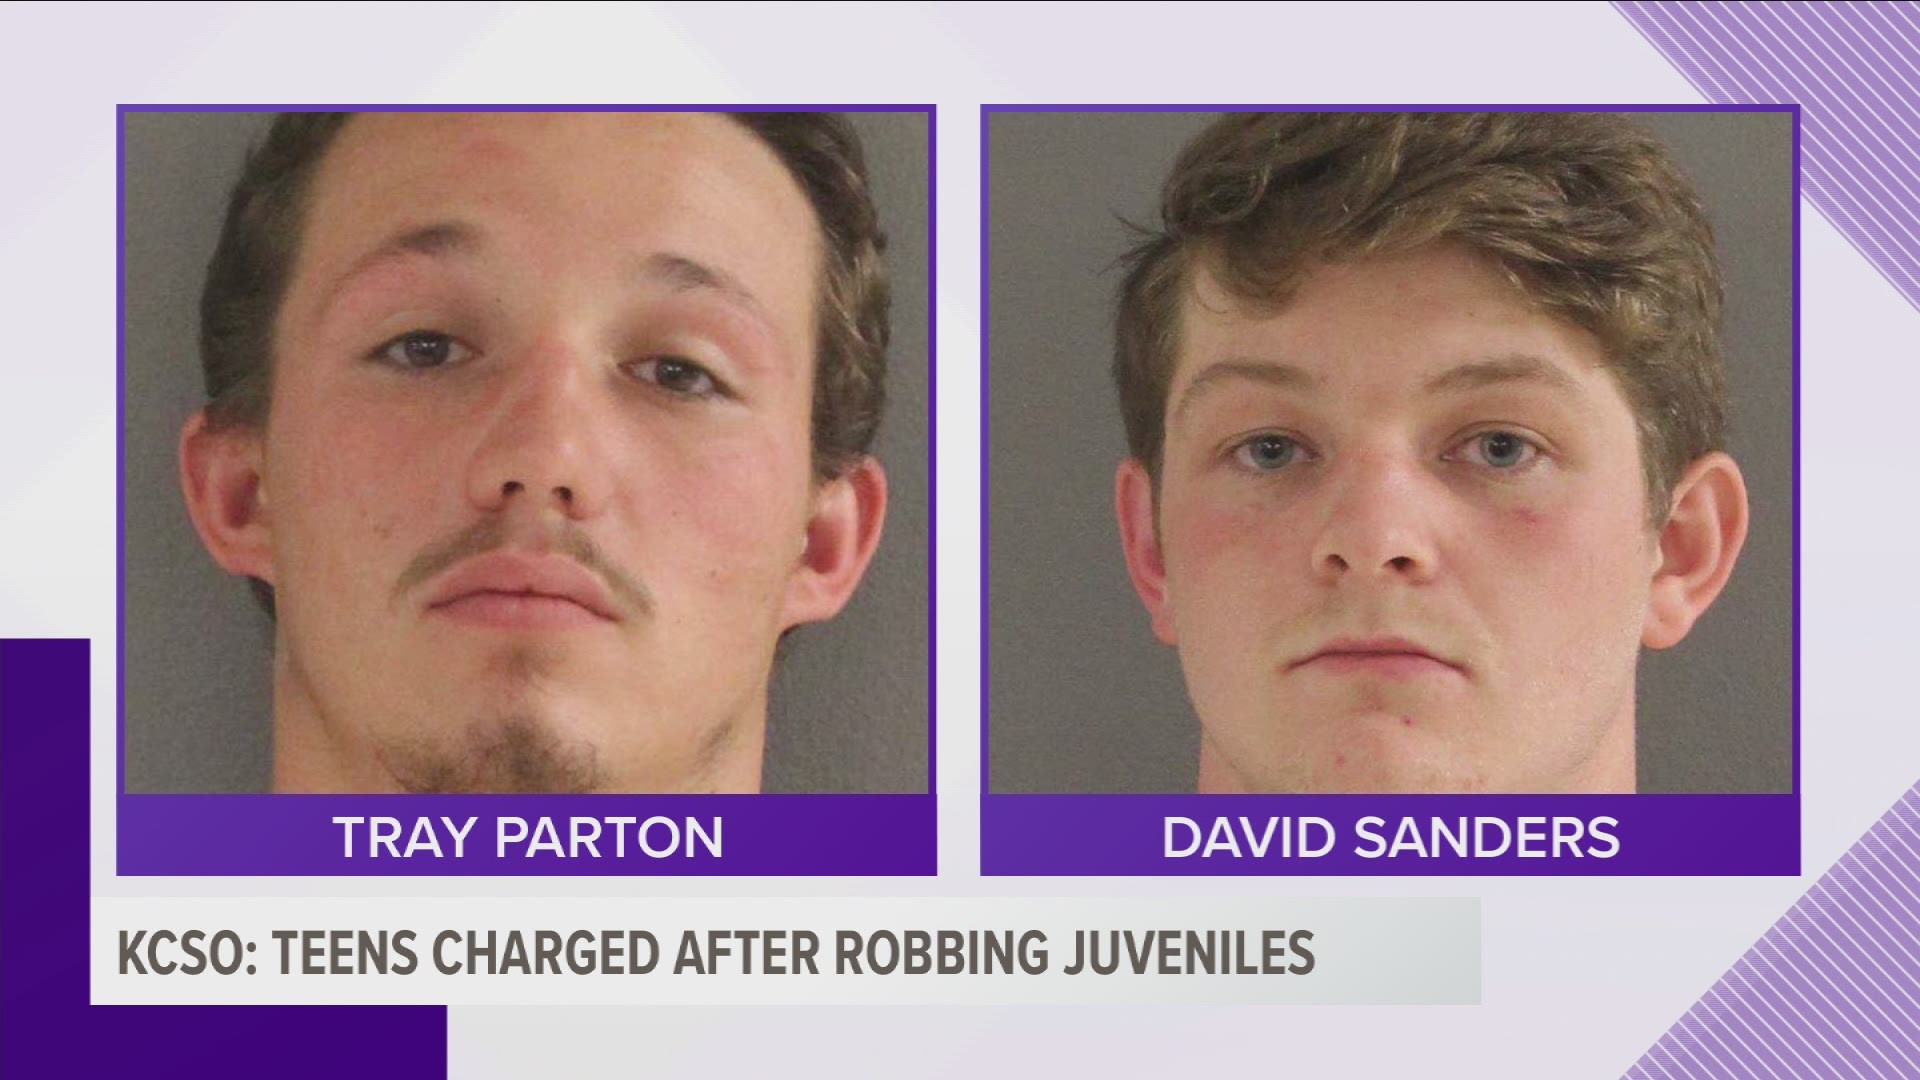 The Knox County Sheriff's Office has arrested two teens in connection to theft with several juveniles.